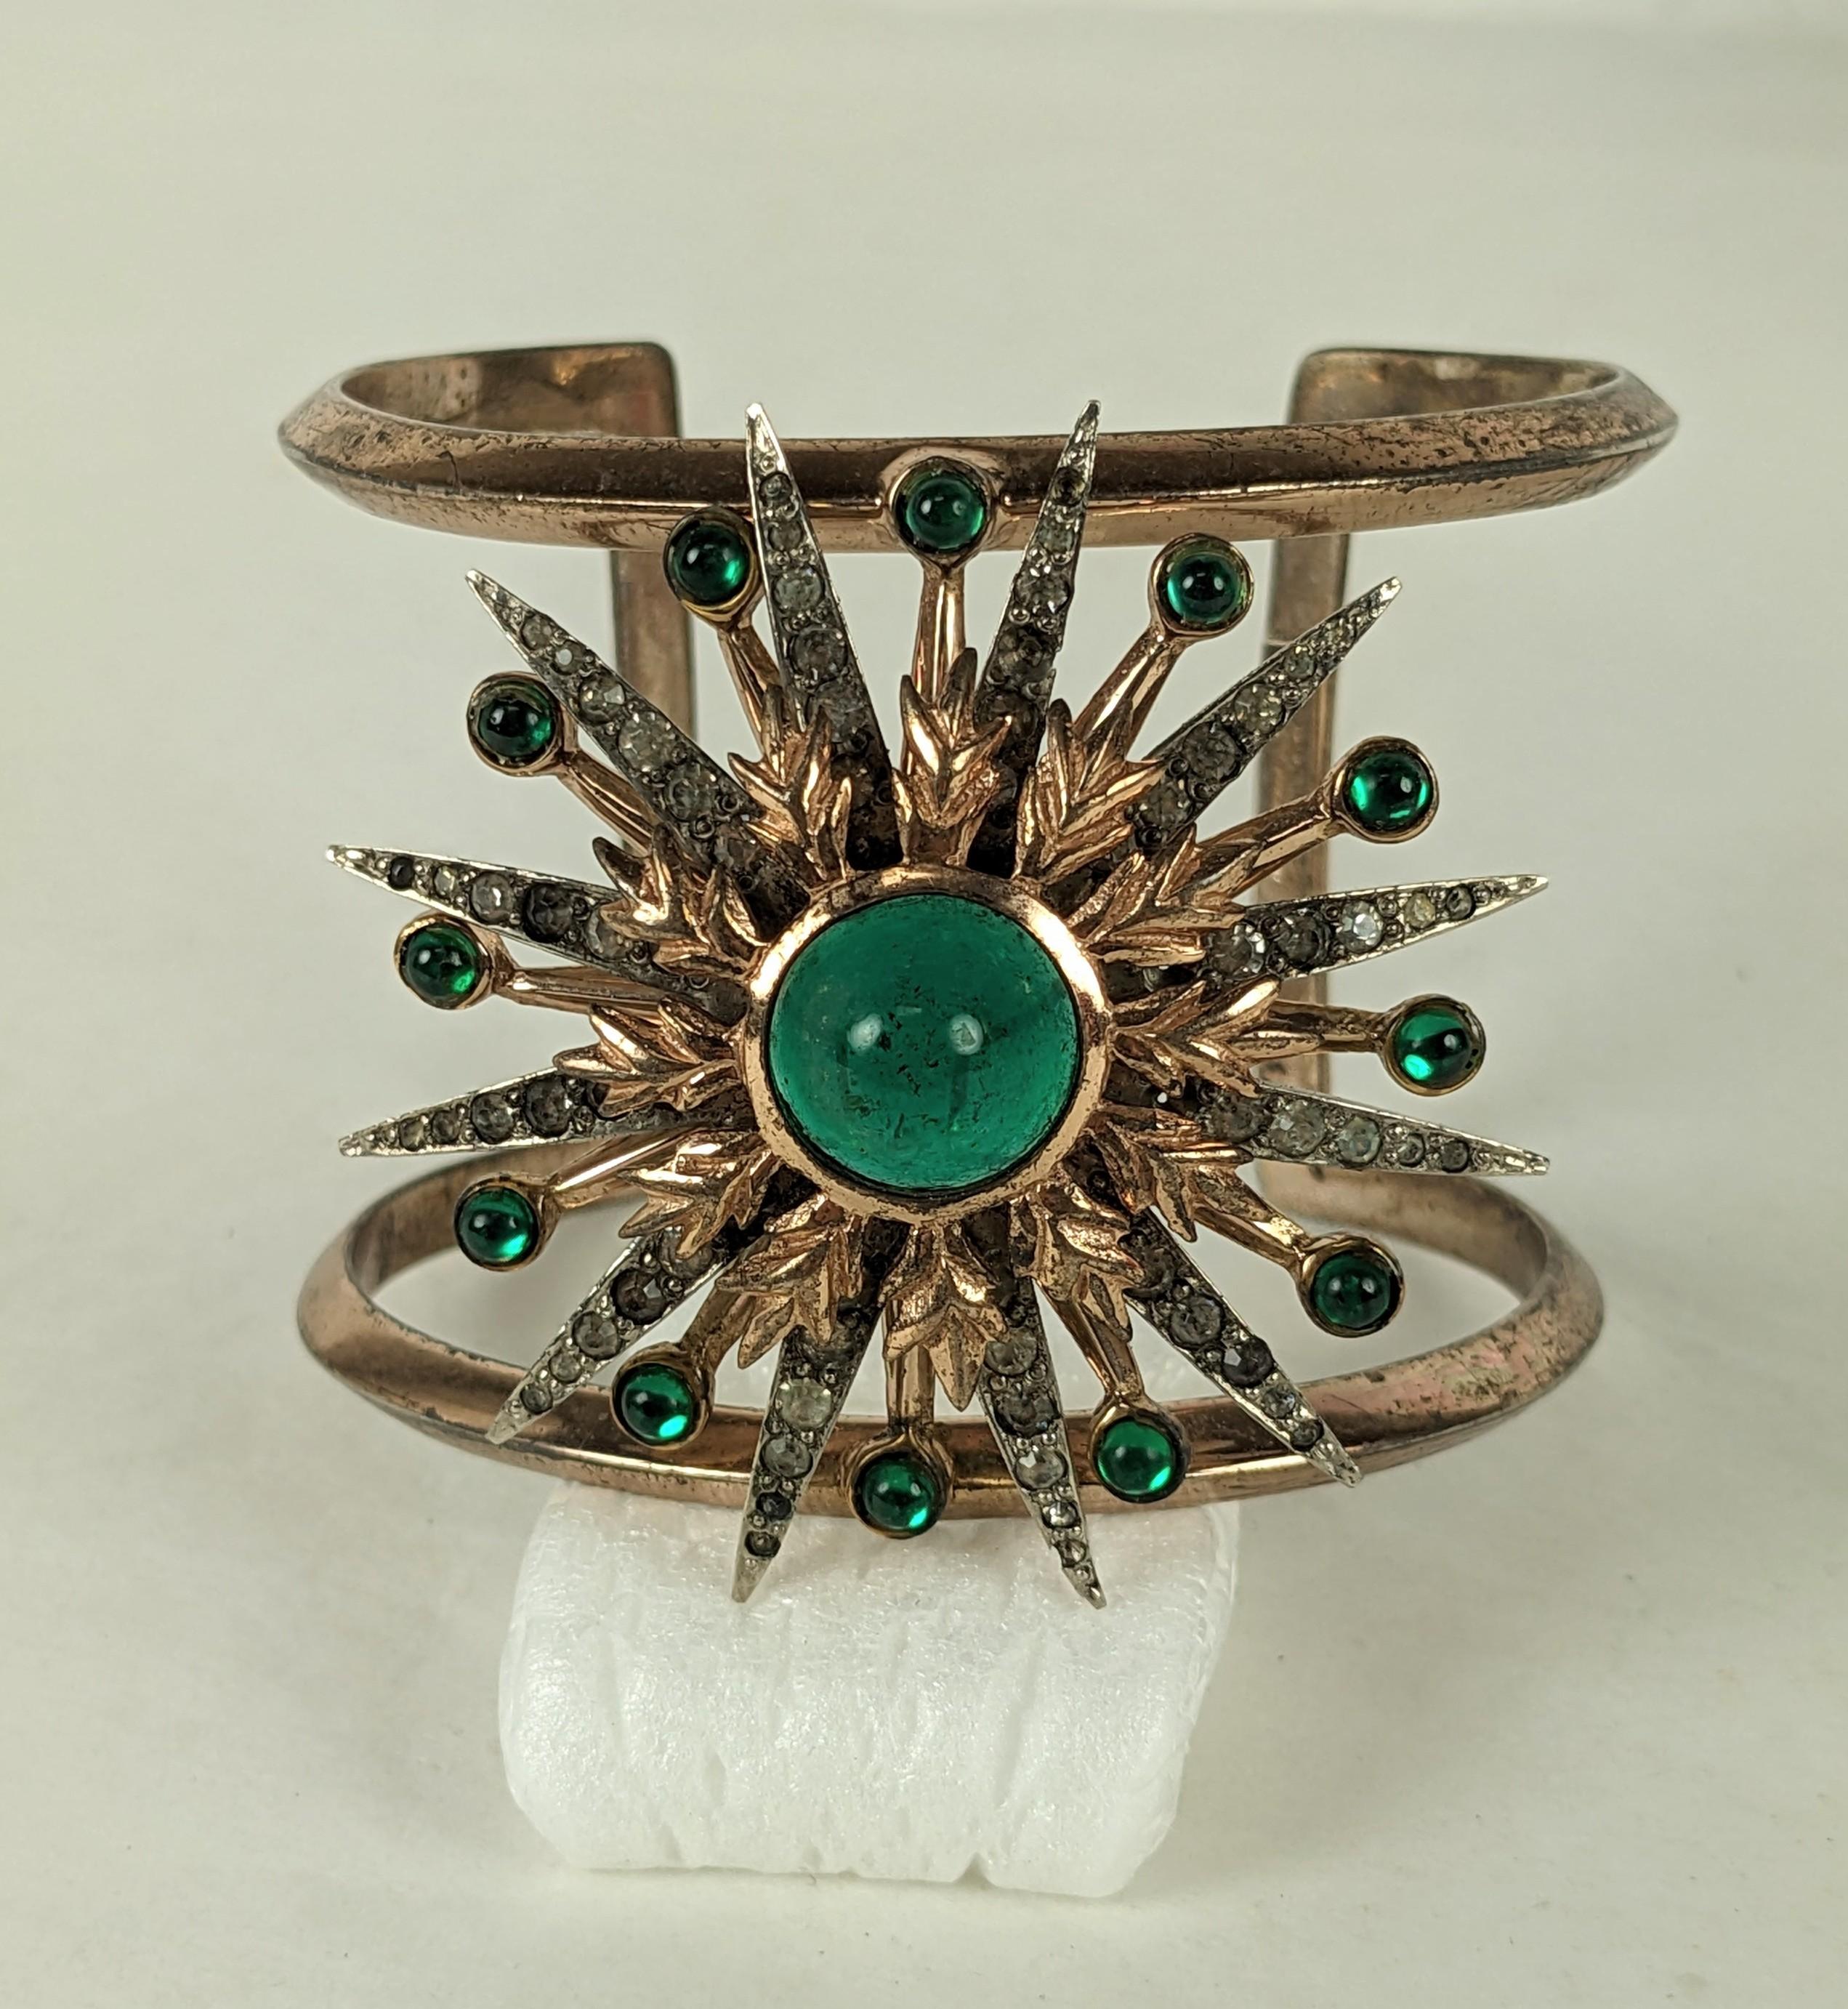 Striking Nettie Rosenstein Starburst Cuff in sterling with pink gold vermeil from the 1940's. Large starburst motif in emerald and crystal pastes. 2